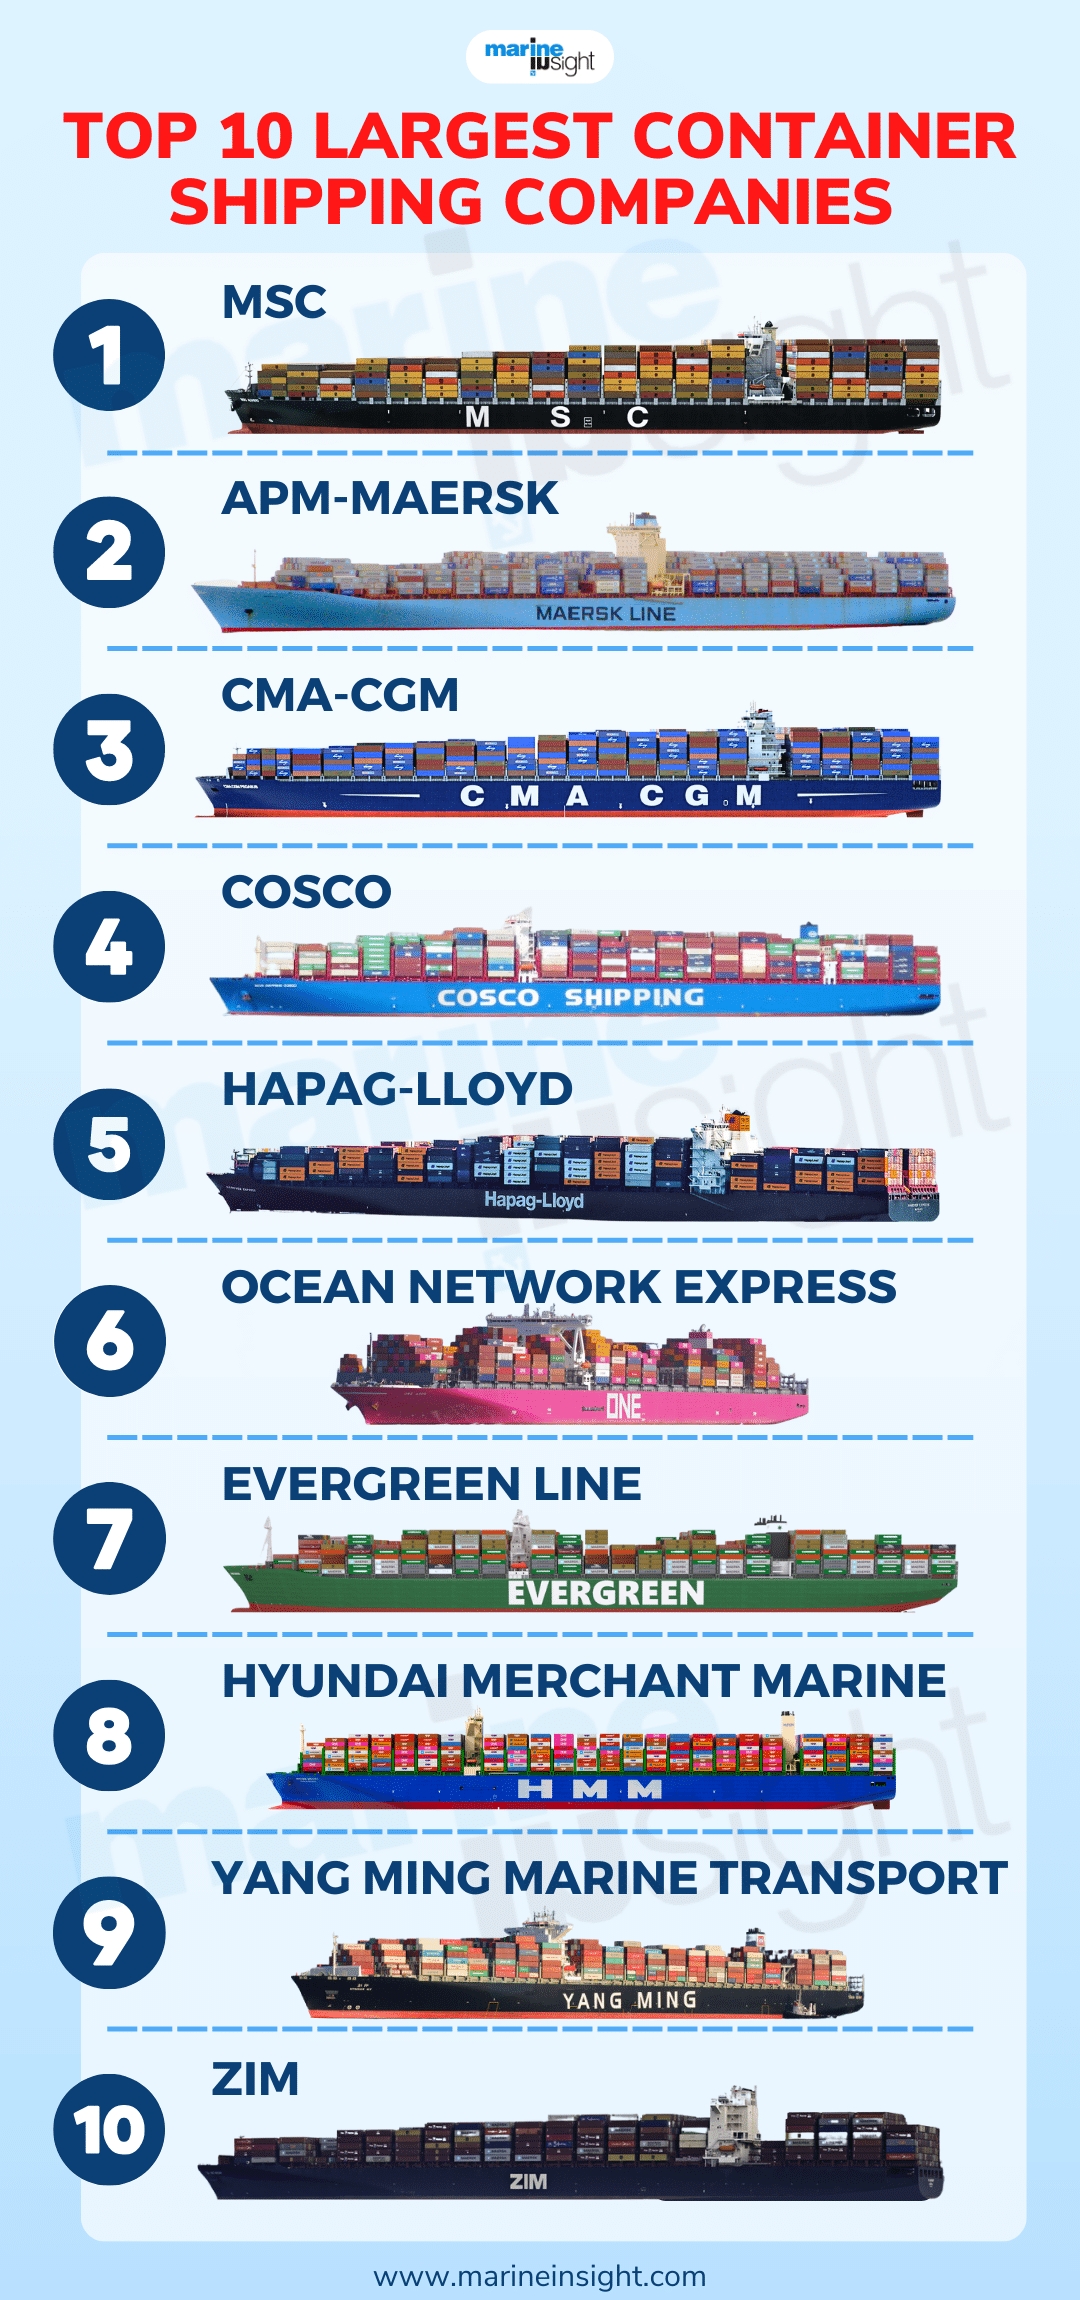 Top 10 Largest Container Shipping Companies